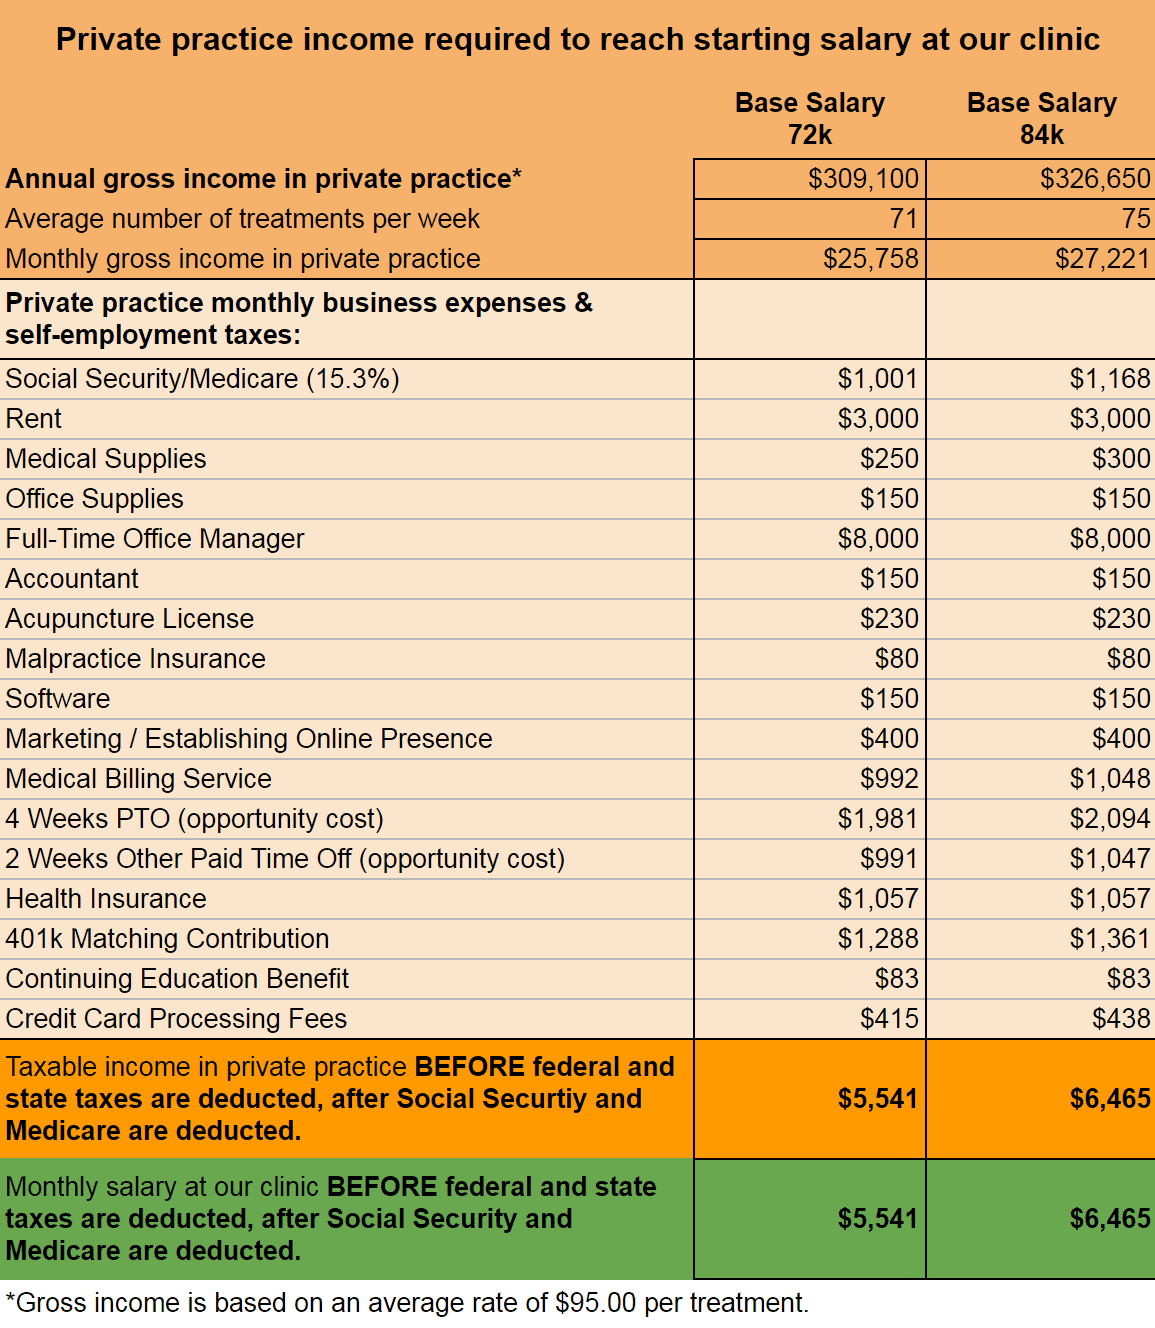 Table of Private practice income required to reach starting salary at Transformational Acupuncture